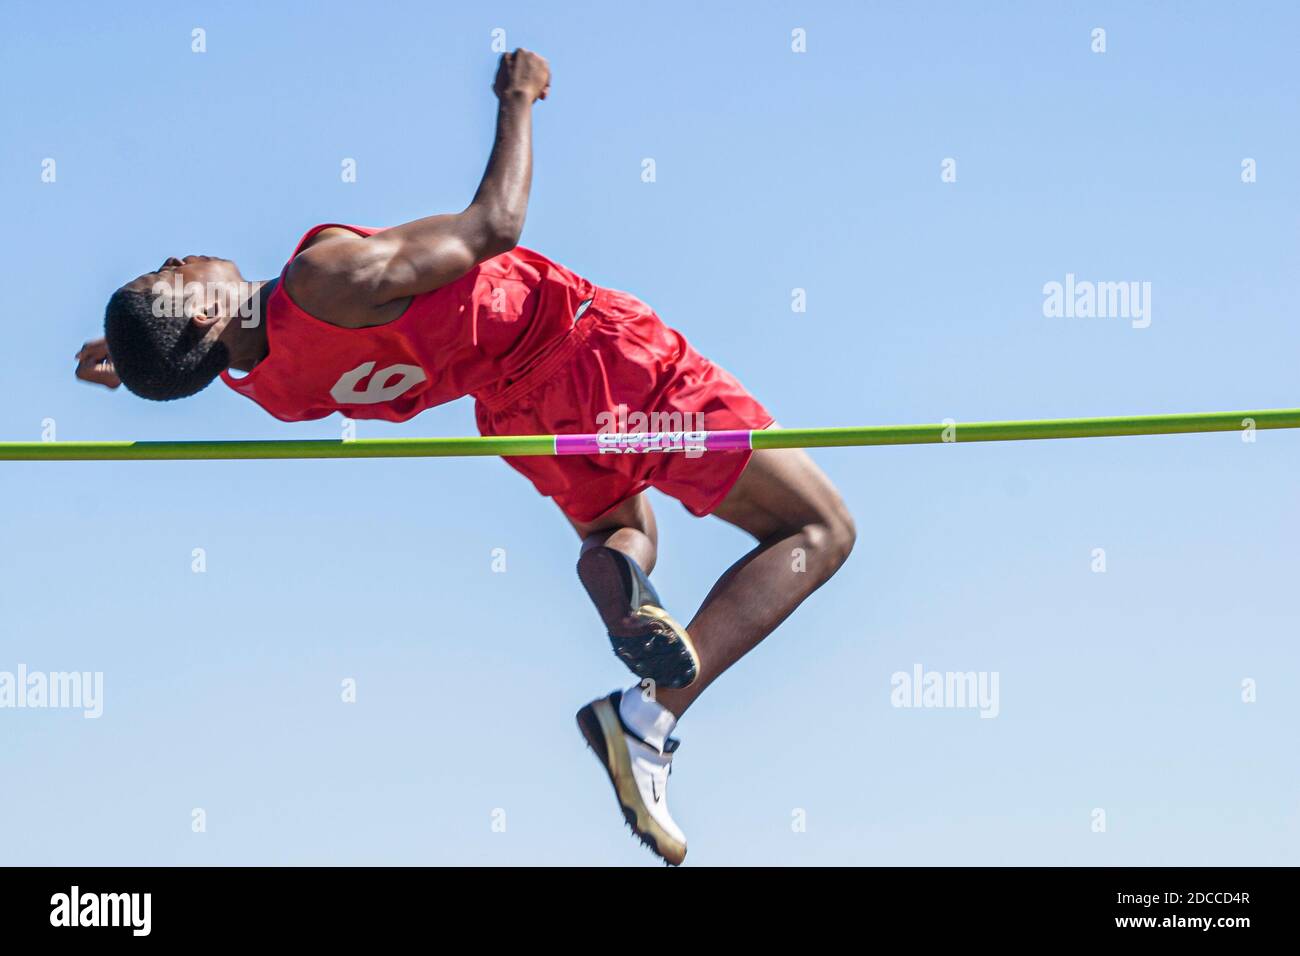 HIGH JUMP definition in American English